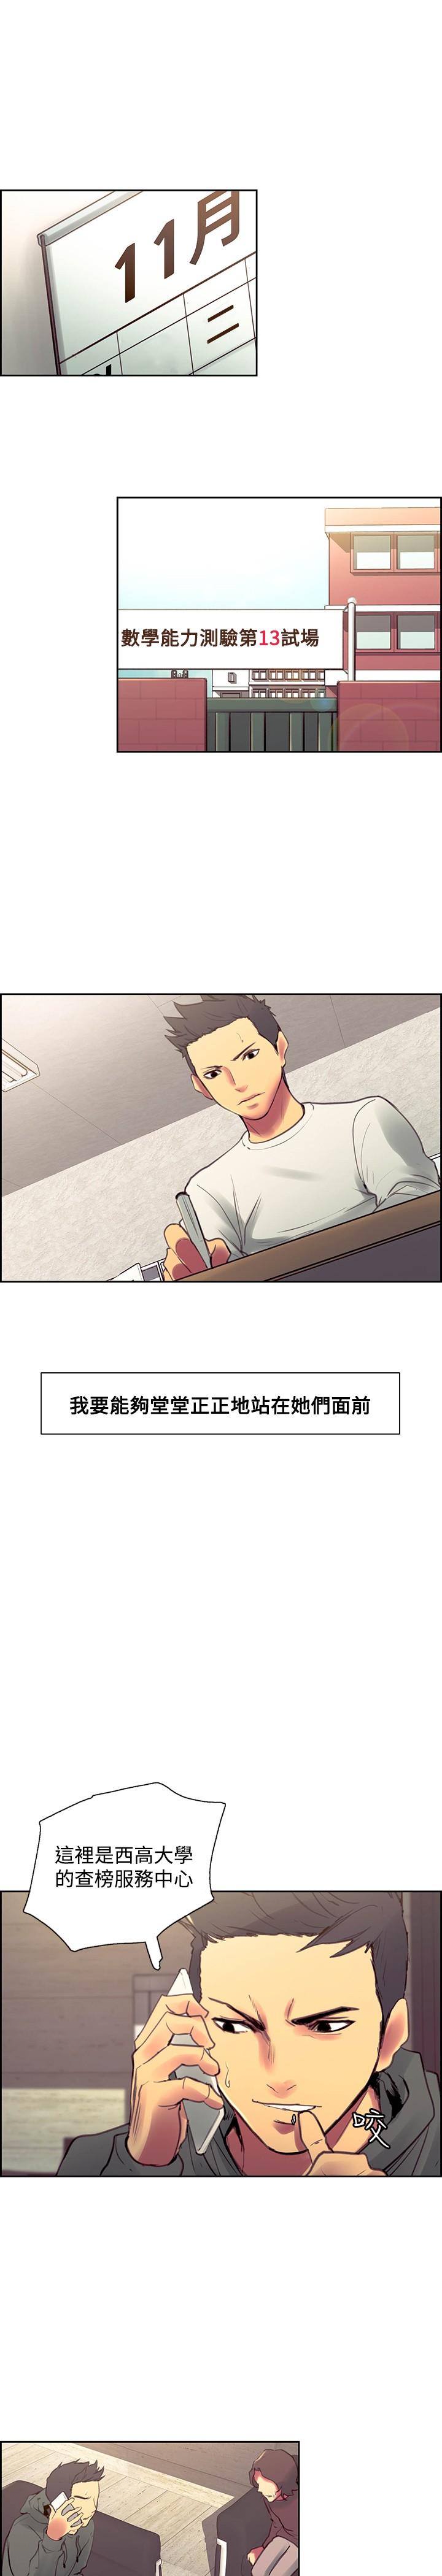 [Serious] Domesticate the Housekeeper 调教家政妇 Ch.29~44END [Chinese]中文 292